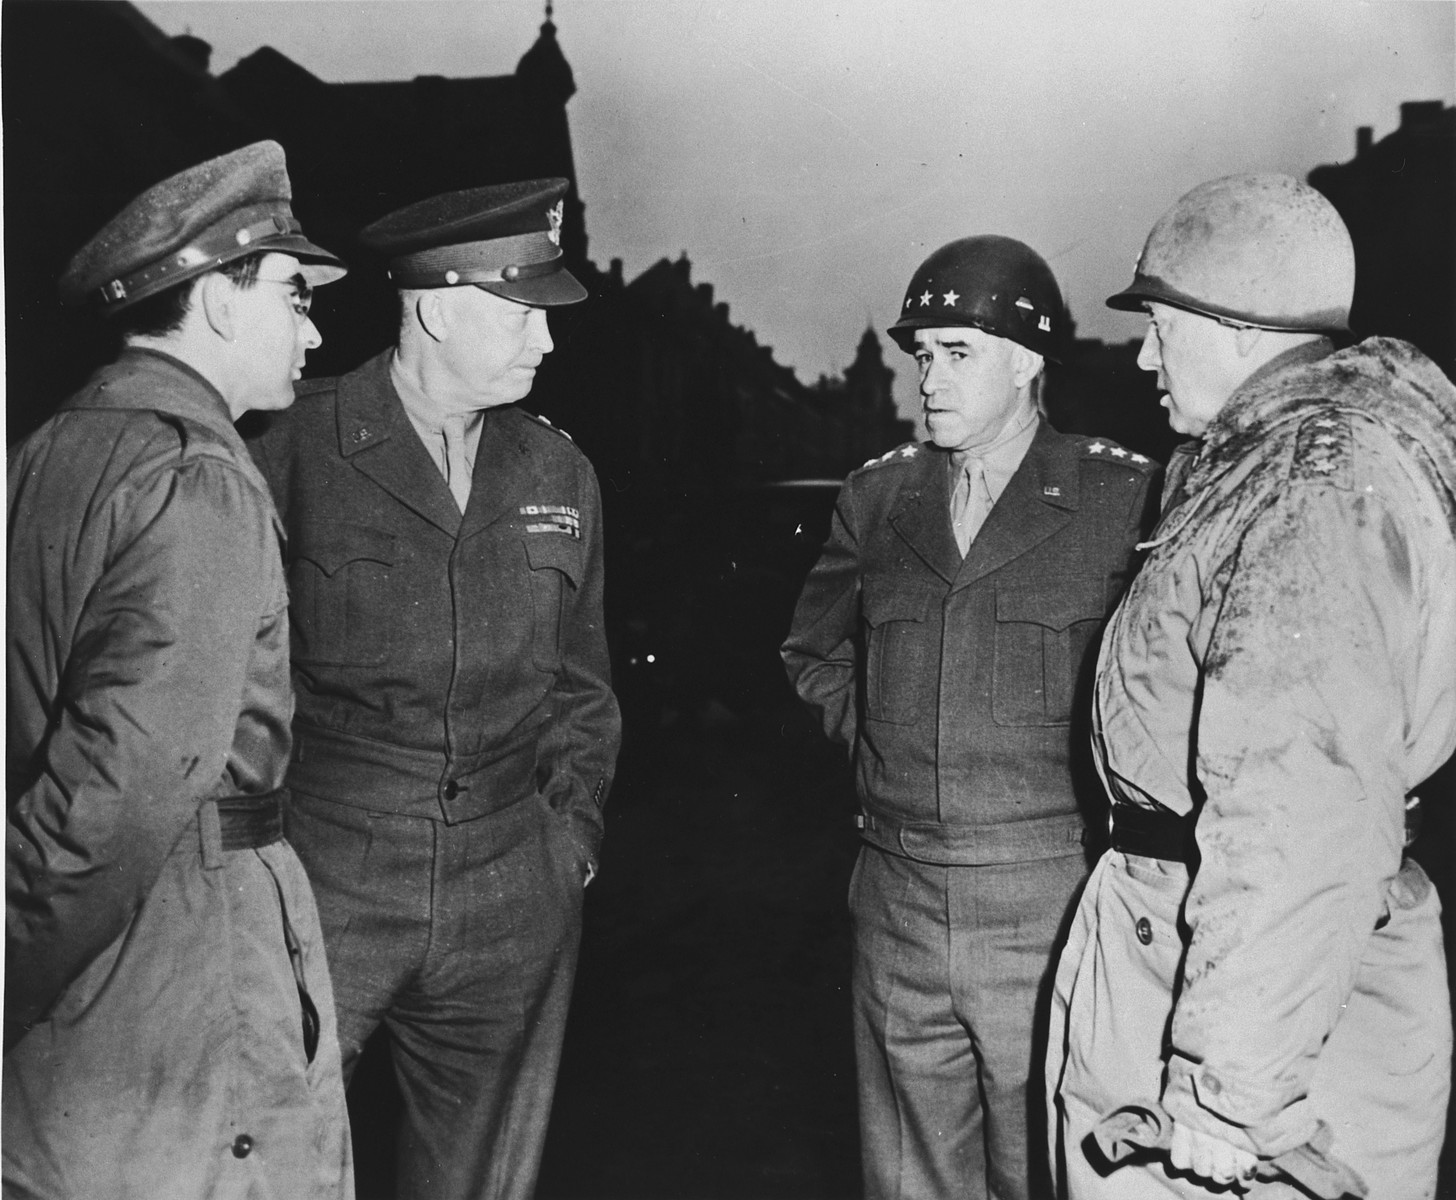 High-ranking U.S. Army officers visit the ruins of Bastogne.

From left to right are Sgt. Jules Grad, correspondent for the newspaper, "Stars and Stripes", Gen. Dwight D. Eisenhower, Lt. Gen. Omar K. Bradley and Lt. Gen. George S. Patton.